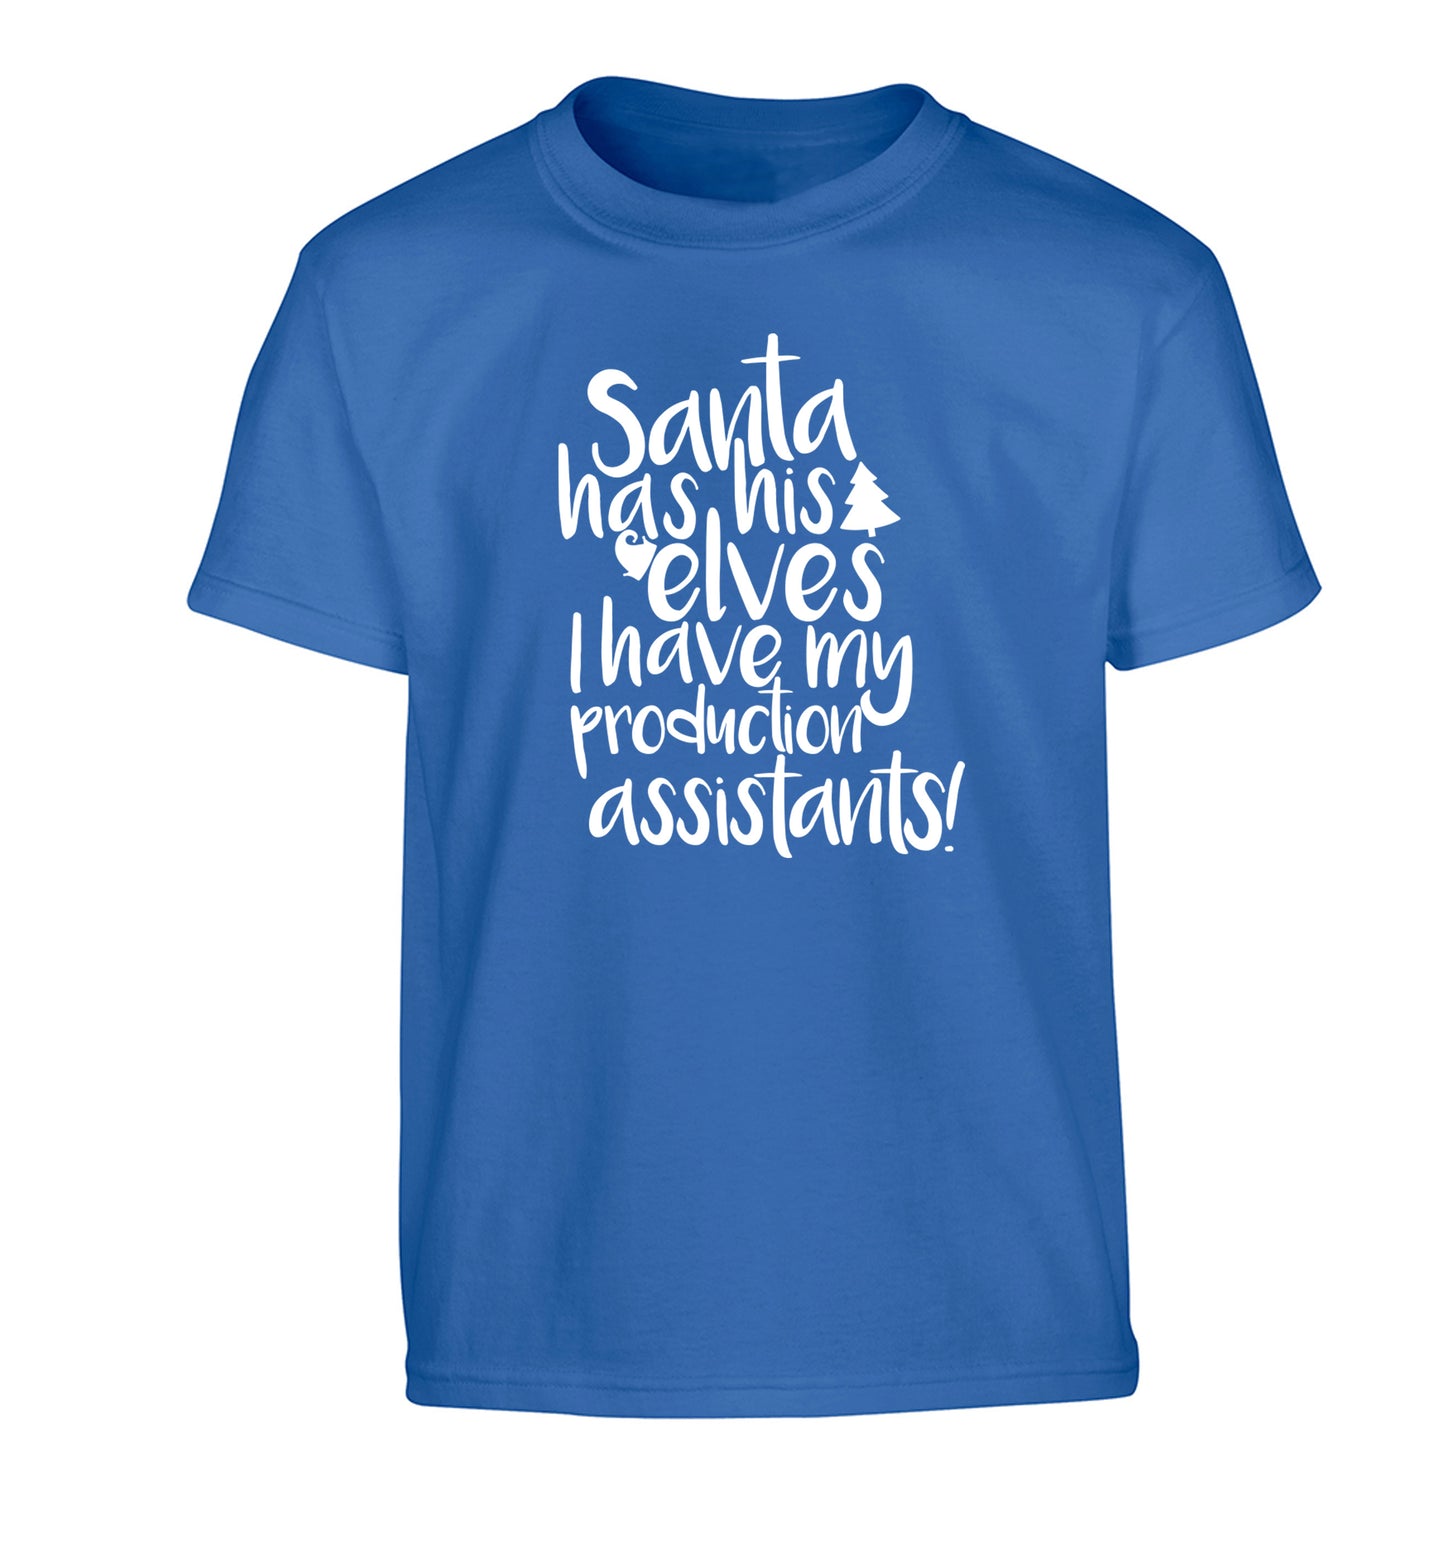 Santa has his elves I have my production assistants Children's blue Tshirt 12-14 Years